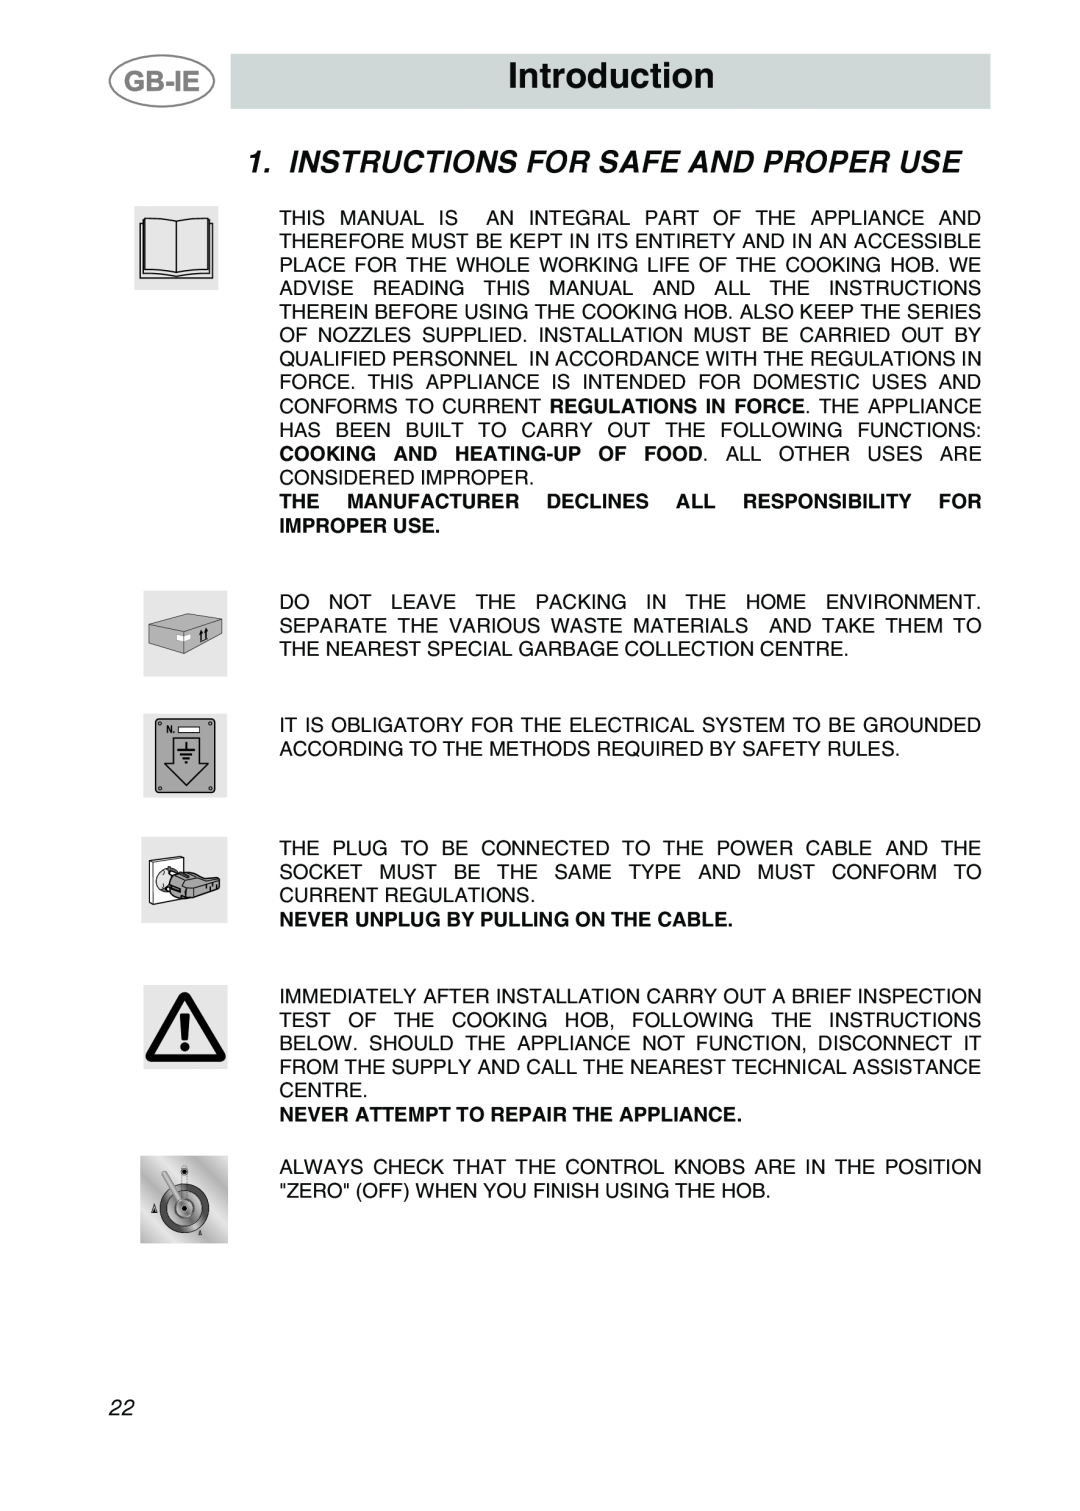 Smeg AP704S3 manual Introduction, Instructions For Safe And Proper Use, Never Unplug By Pulling On The Cable 